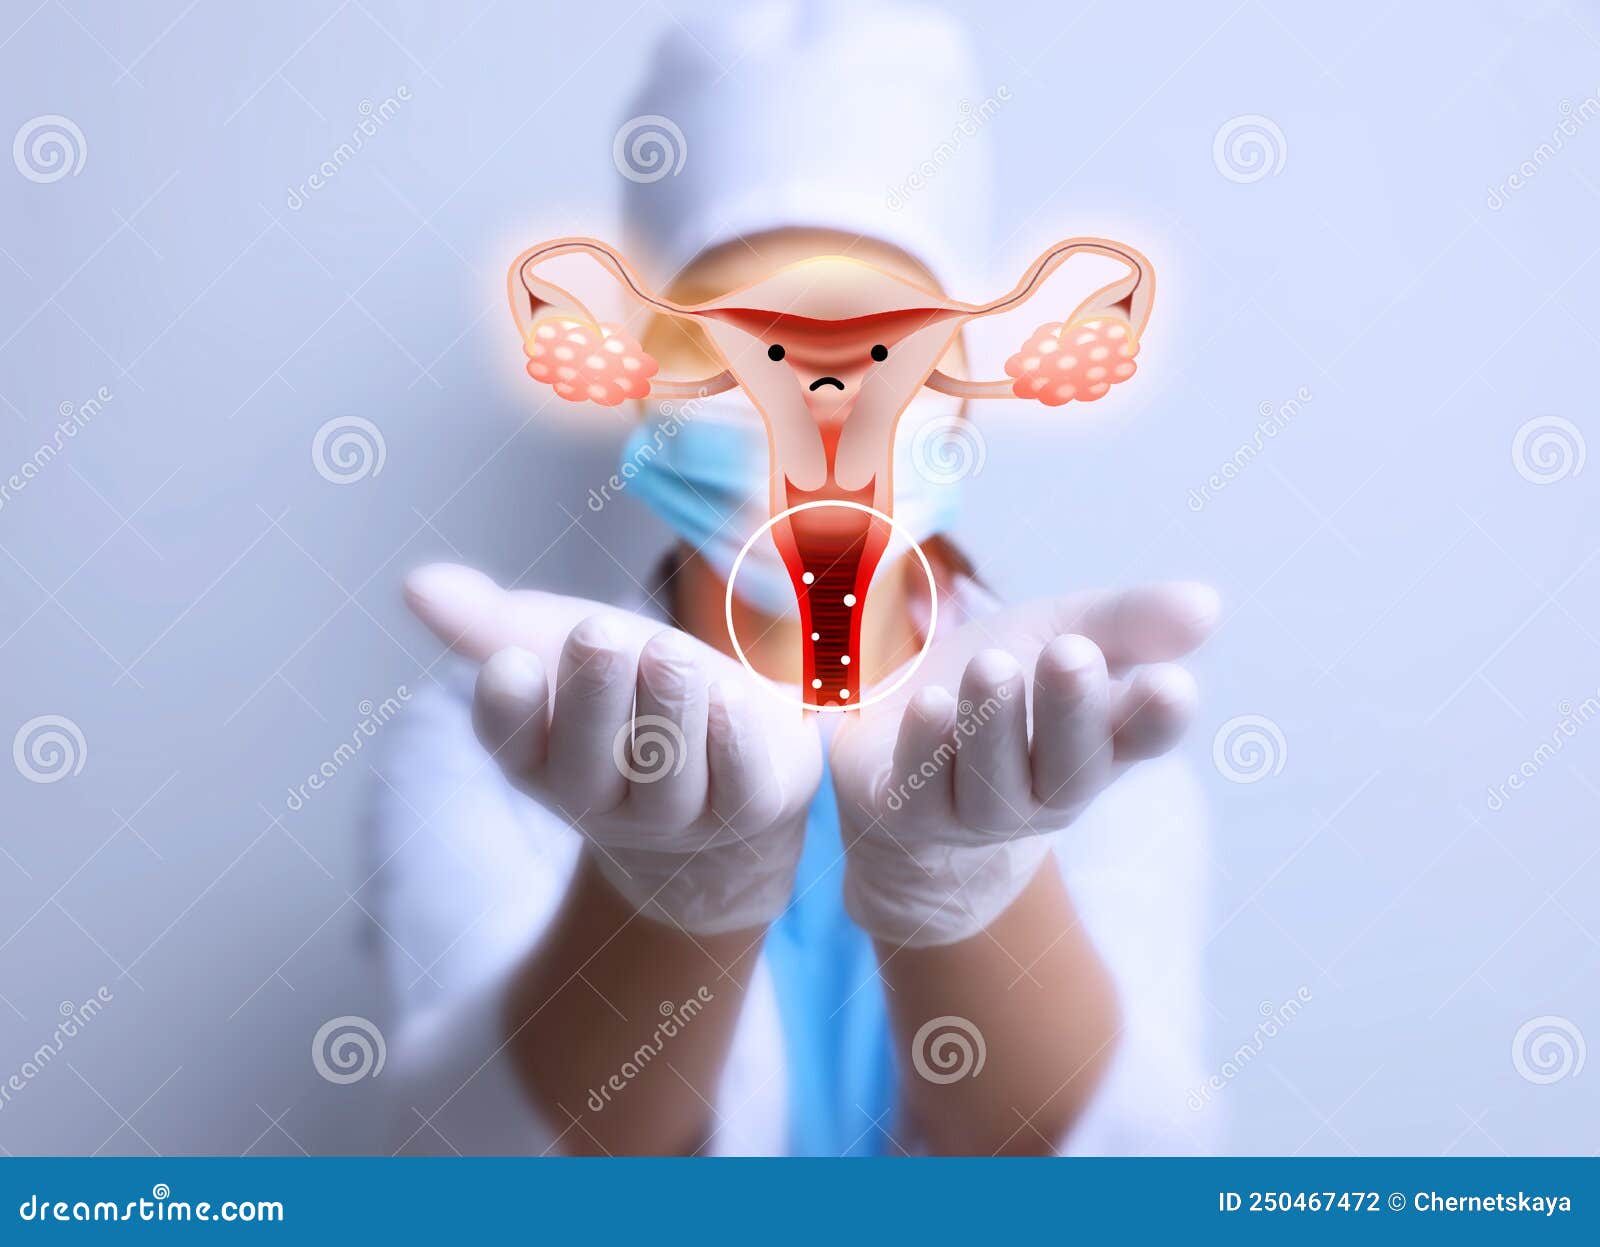 doctor demonstrating virtual image of infected female reproductive system on light background, closeup. vaginal candidiasis